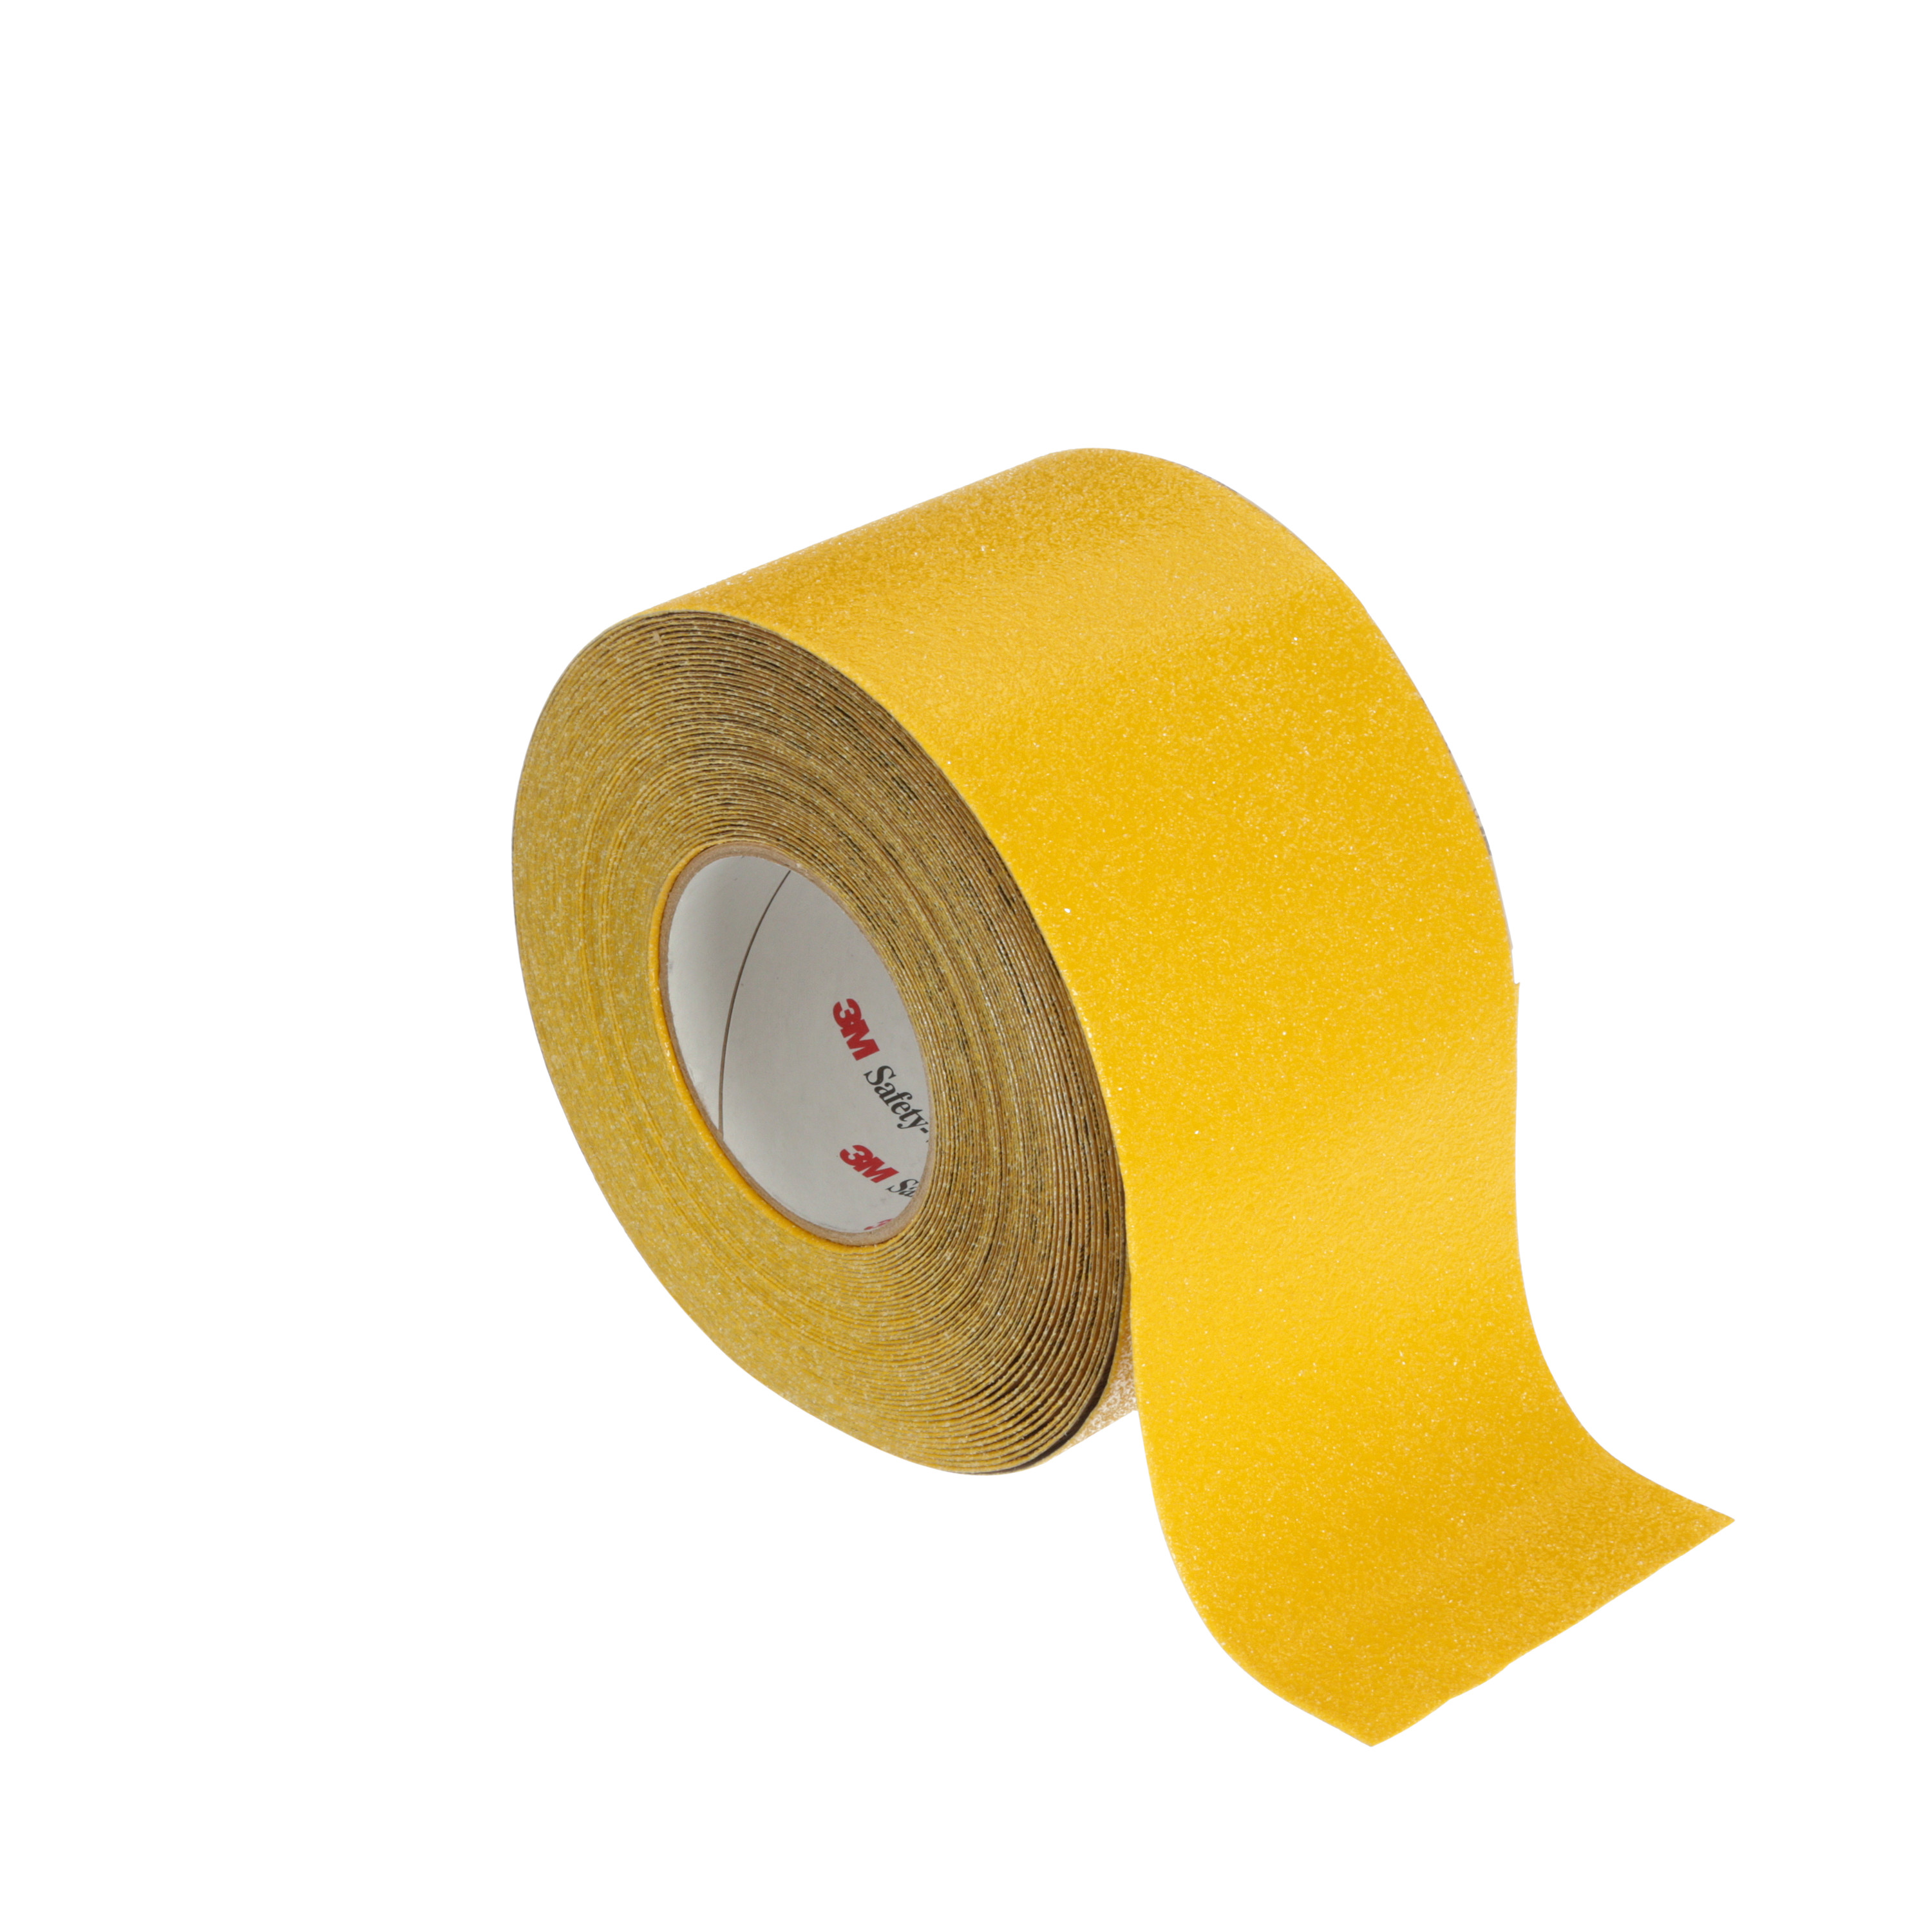 3M™ Safety-Walk™ Slip-Resistant Conformable Tapes & Treads 530, Safety
Yellow, 4 in x 60 ft, Roll, 1/Case